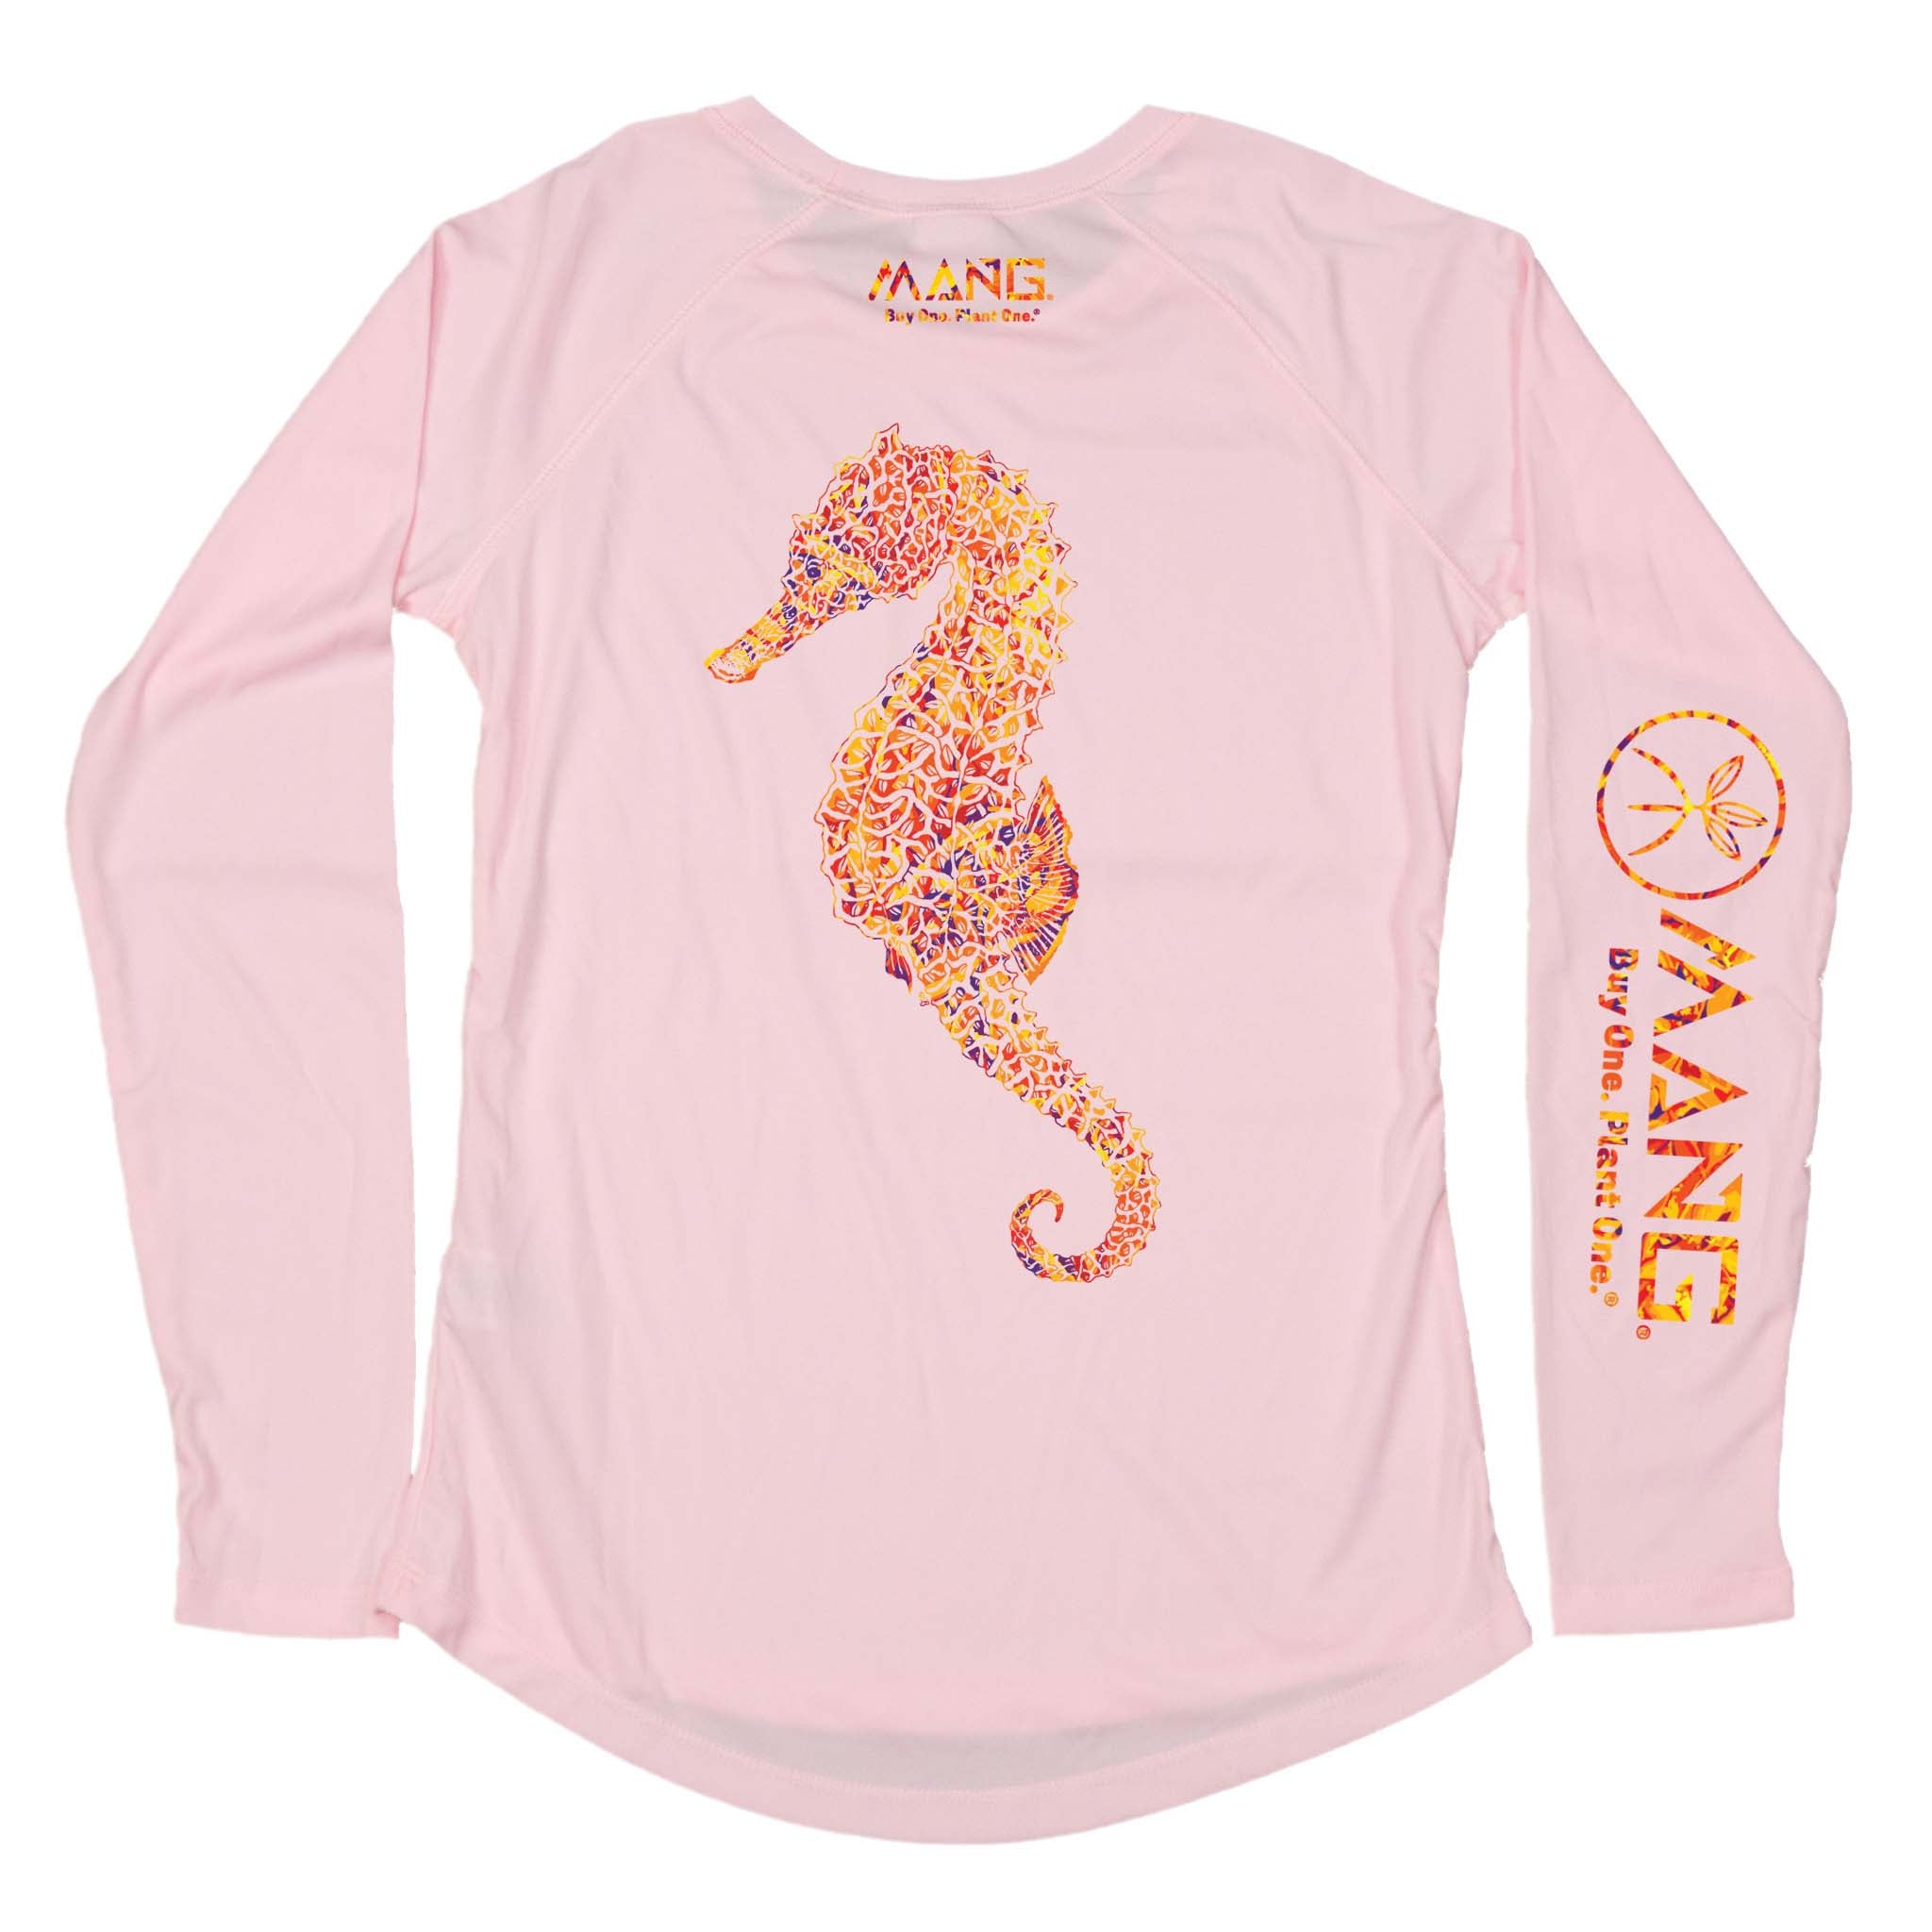 Seahorse MANG - Women's - LS - XS / Seagrass